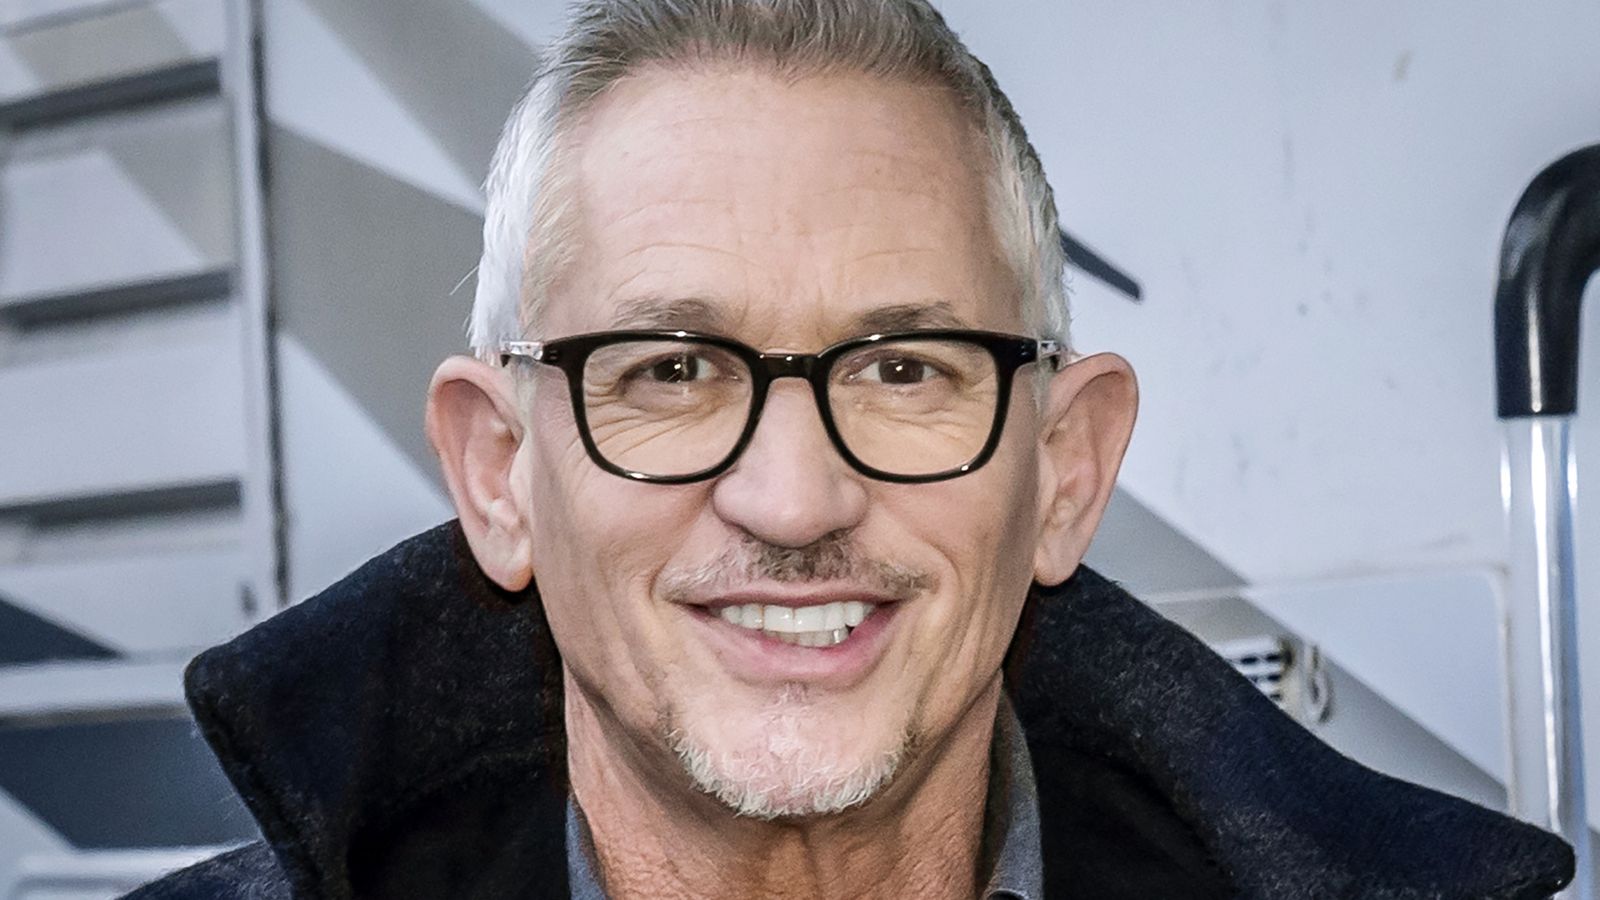 Gary Lineker backs new BBC rules allowing high-profile presenters to express political views